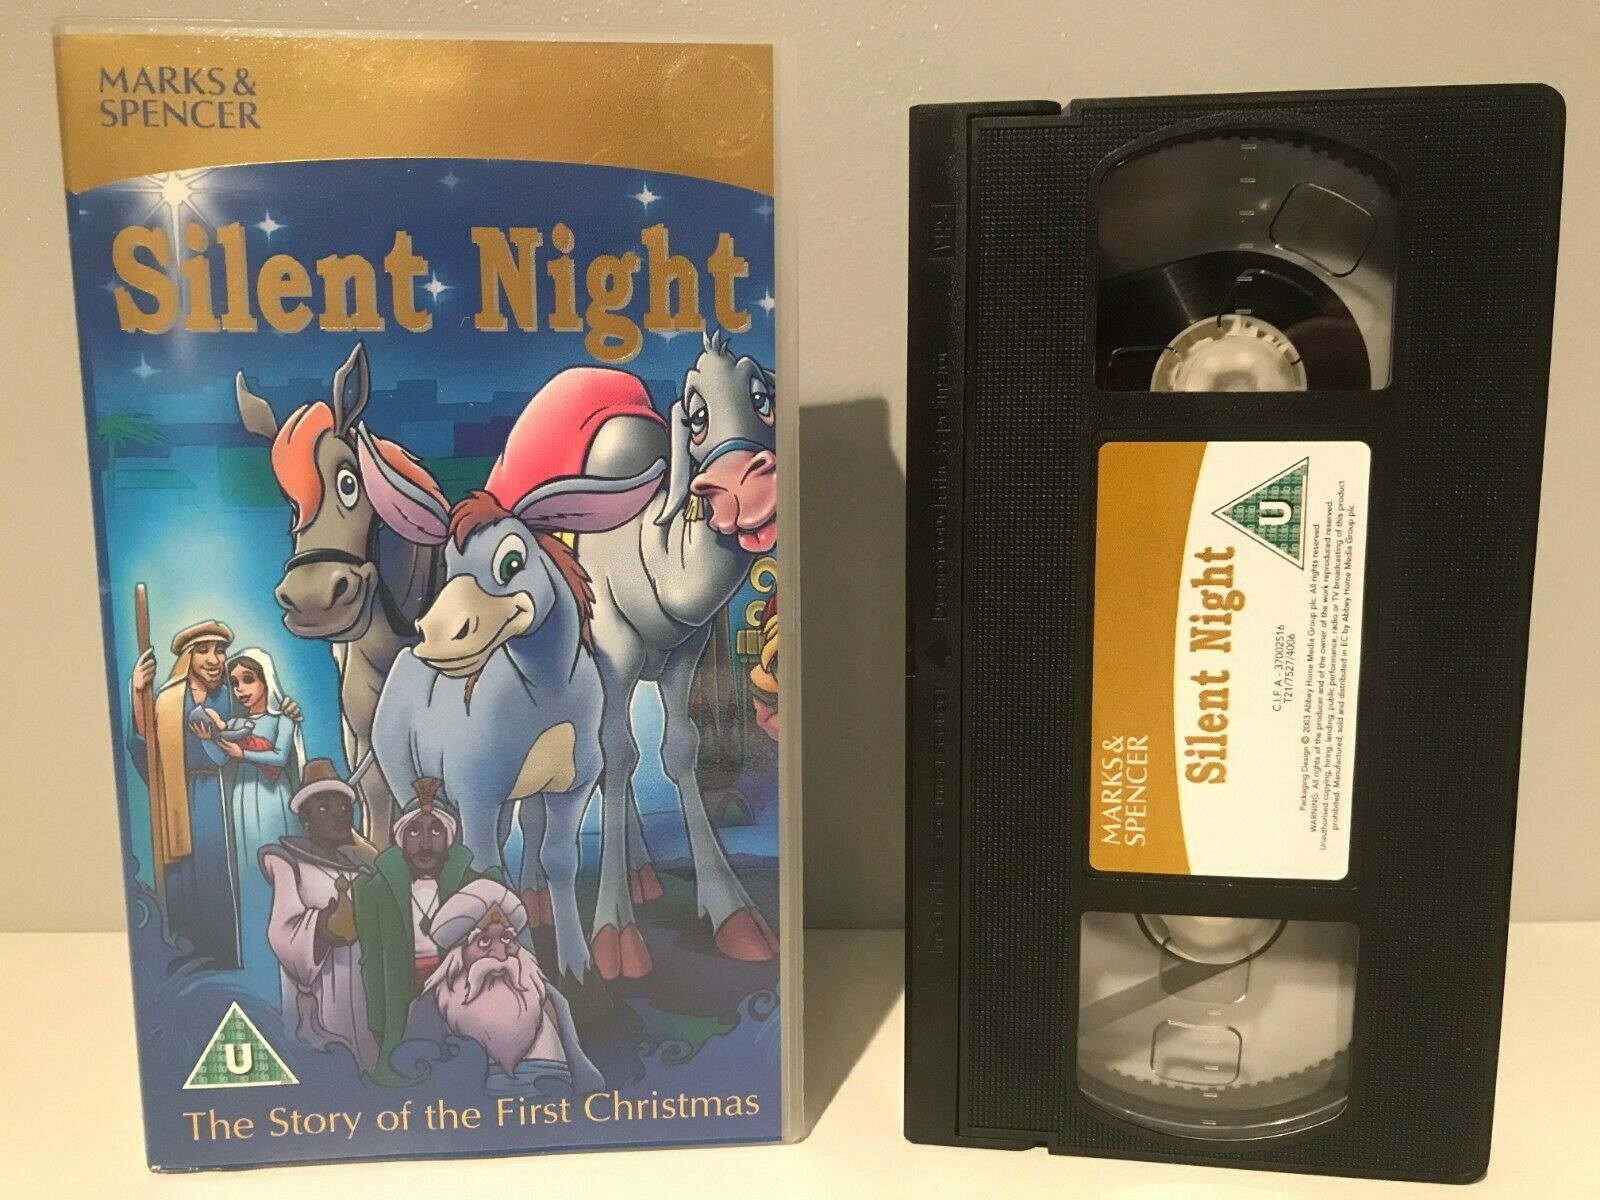 Silent Night [Marks & Spencer] First Christmas Story - Animated - Kids - Pal VHS-